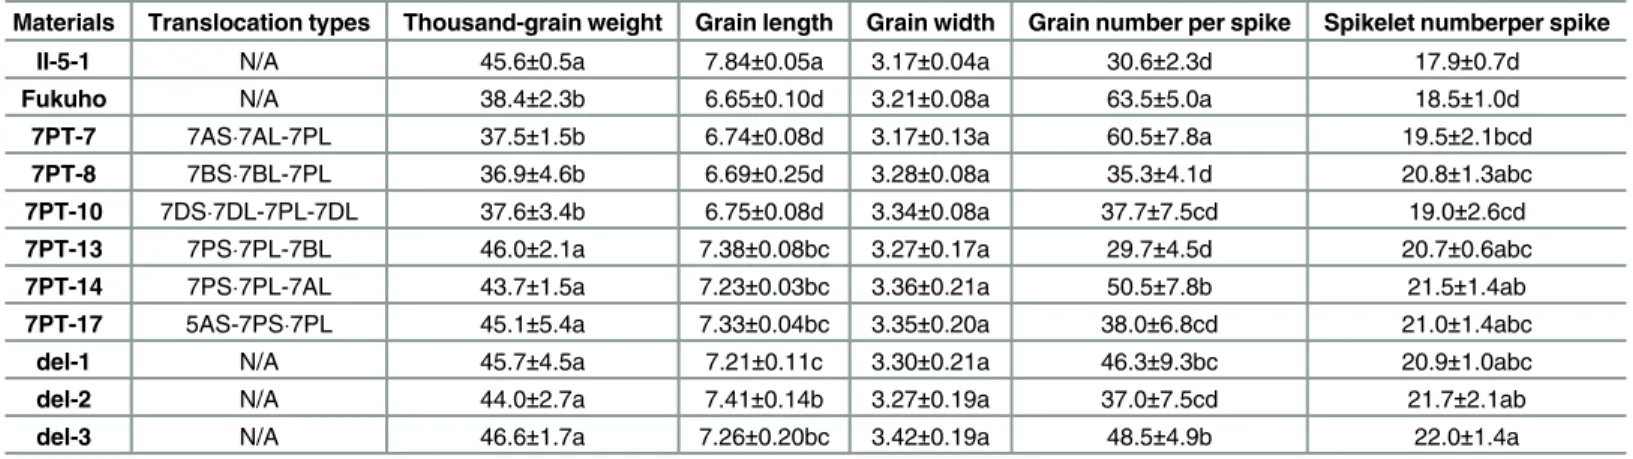 Table 4. Evaluation of the spike traits of some wheat-A. cristatum translocation and deletion lines.